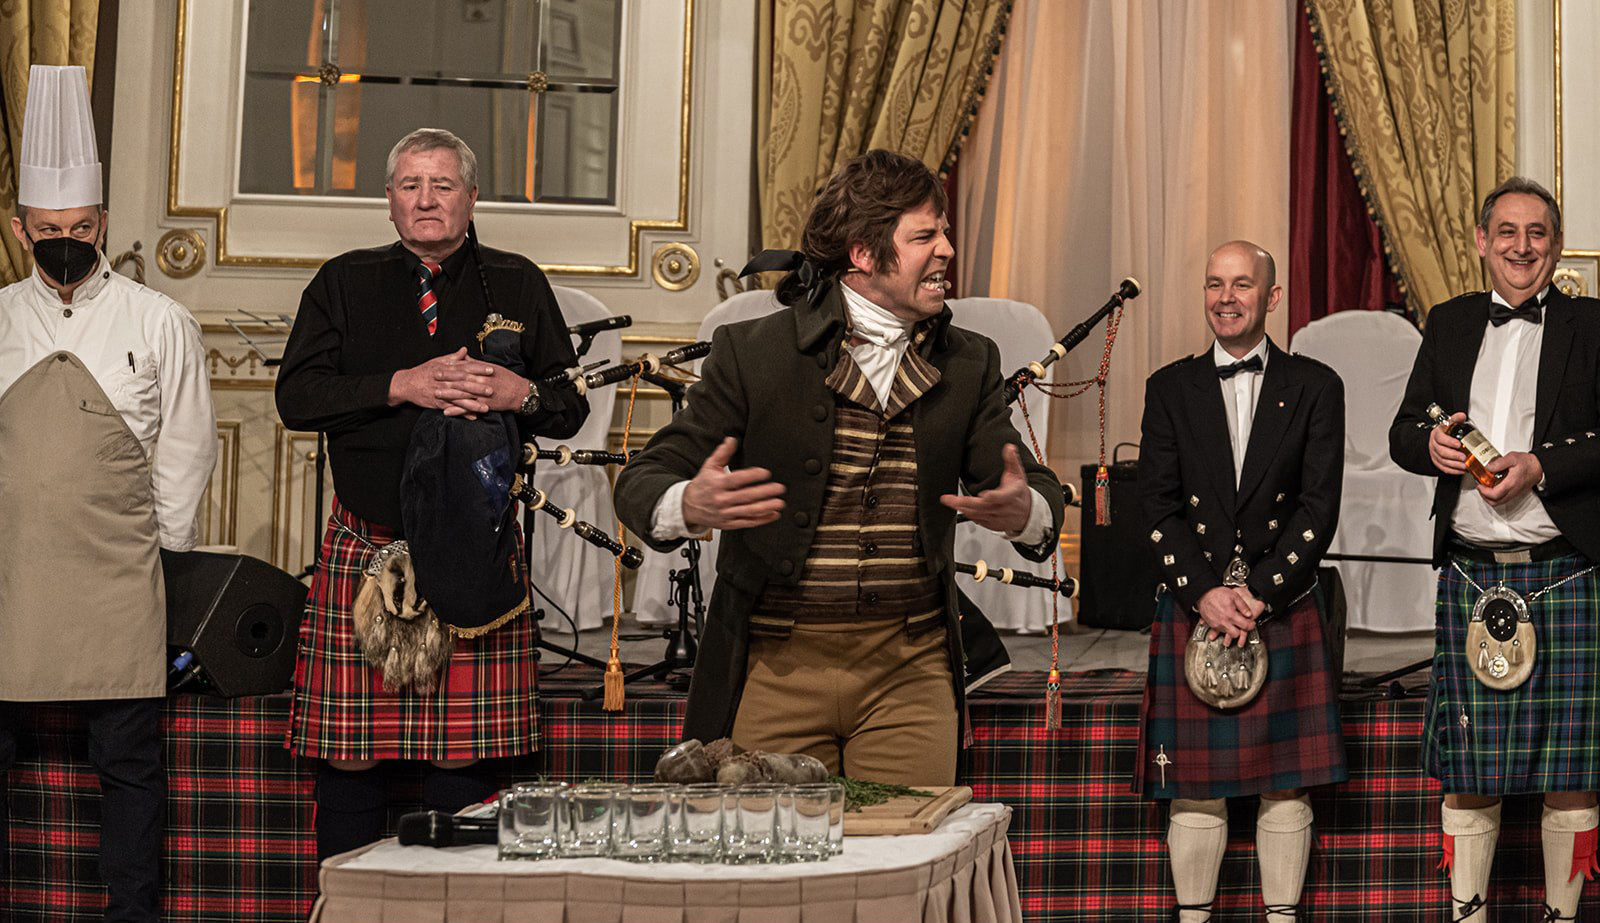 2023 Burns Supper Tickets go on Sale as 2022 Projects Detail...